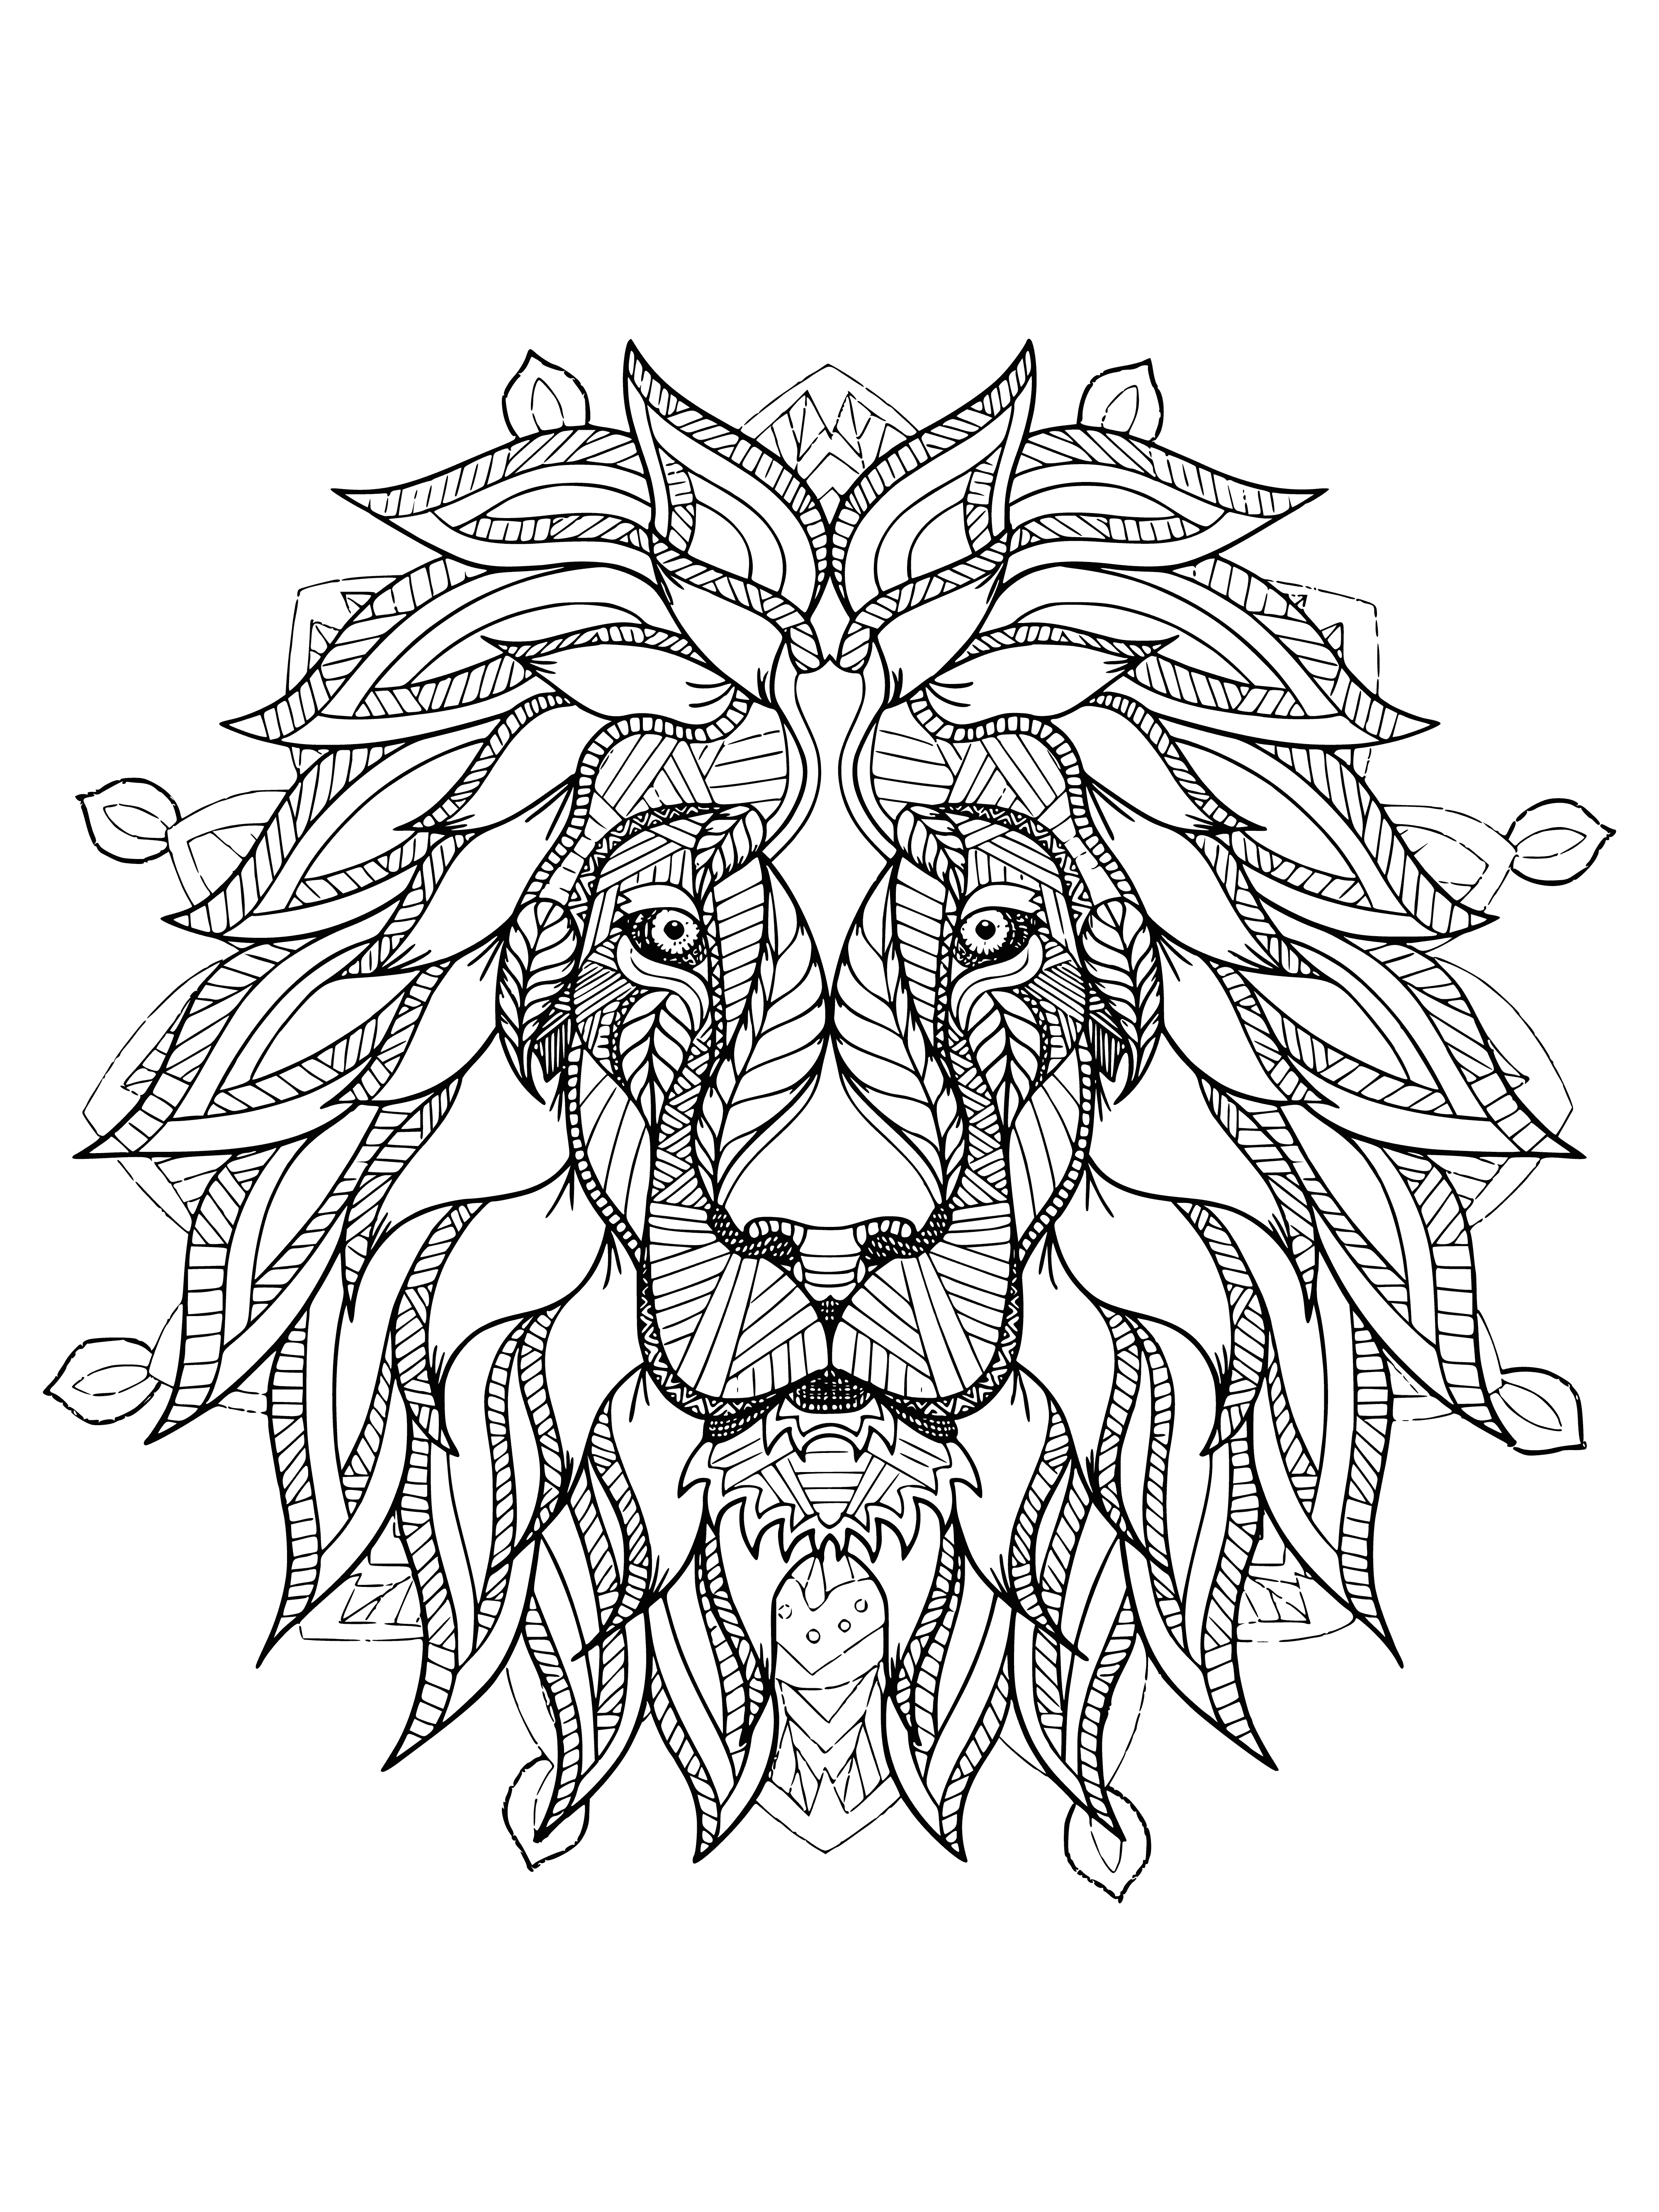 coloring page: -> Coloring page of a calming lion to help with stress, situated in a grassy field, inviting people to color it.